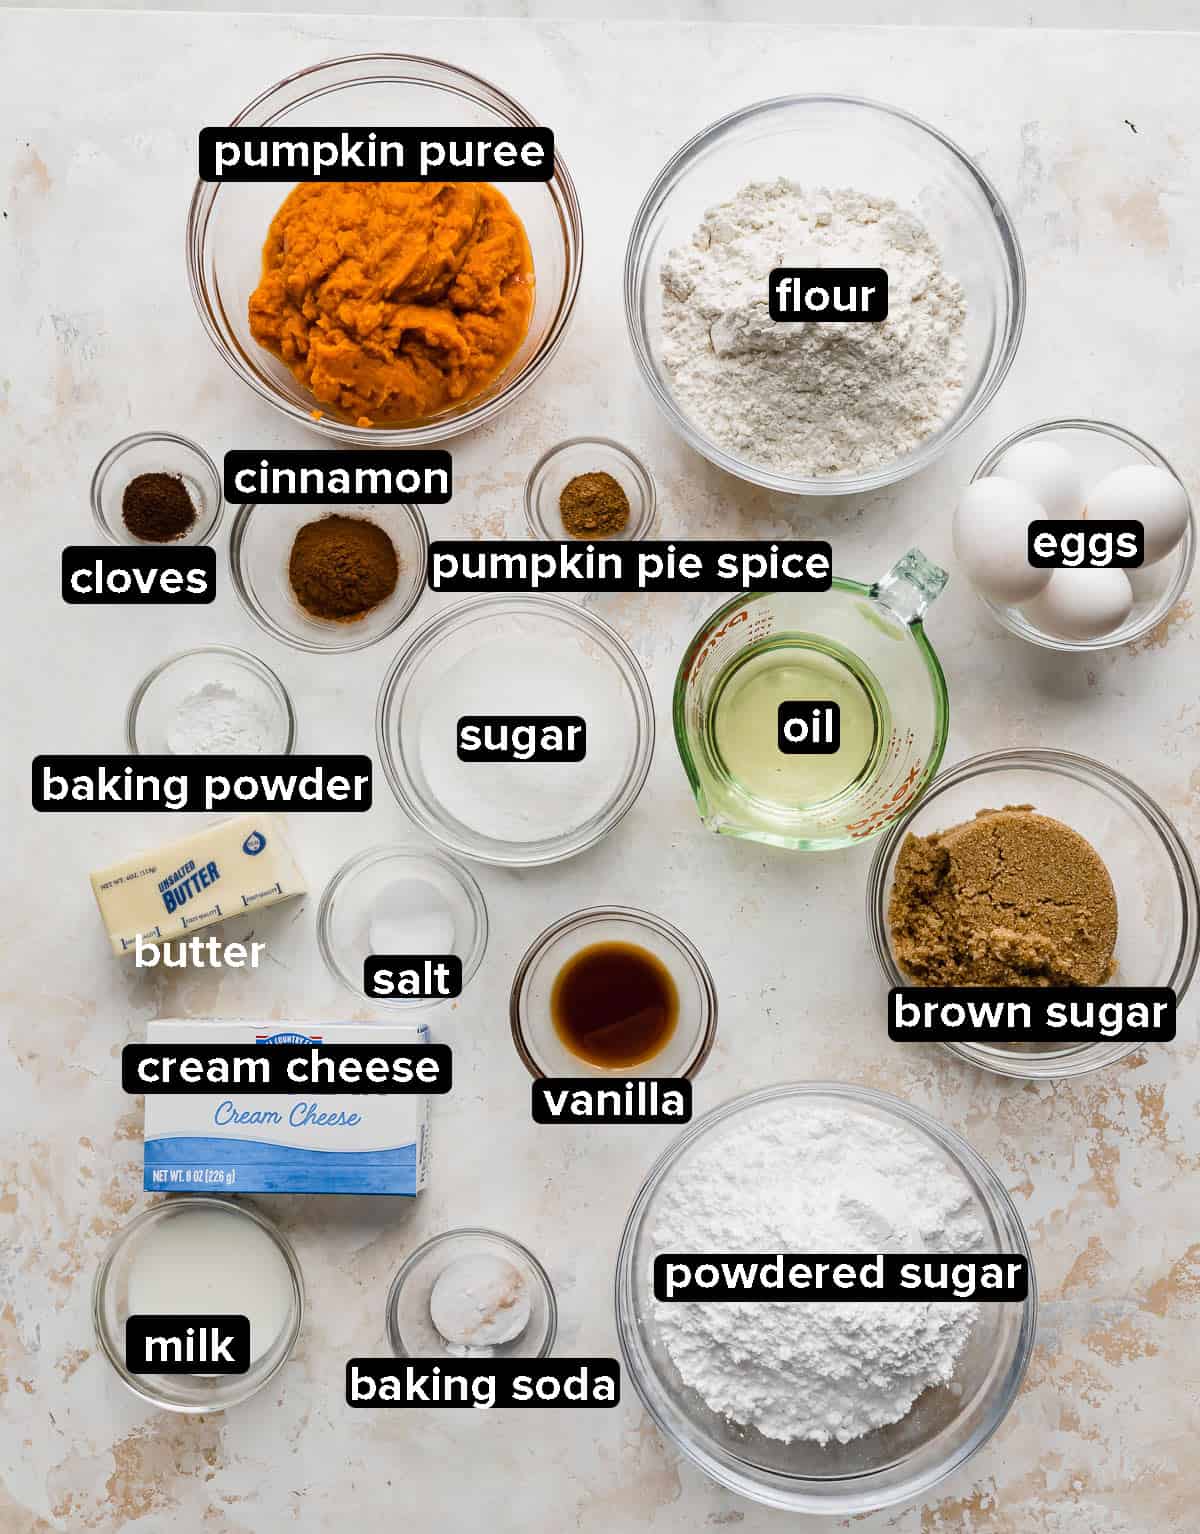 Pumpkin Layer Cake ingredients in small glass bowls on a textured white background.